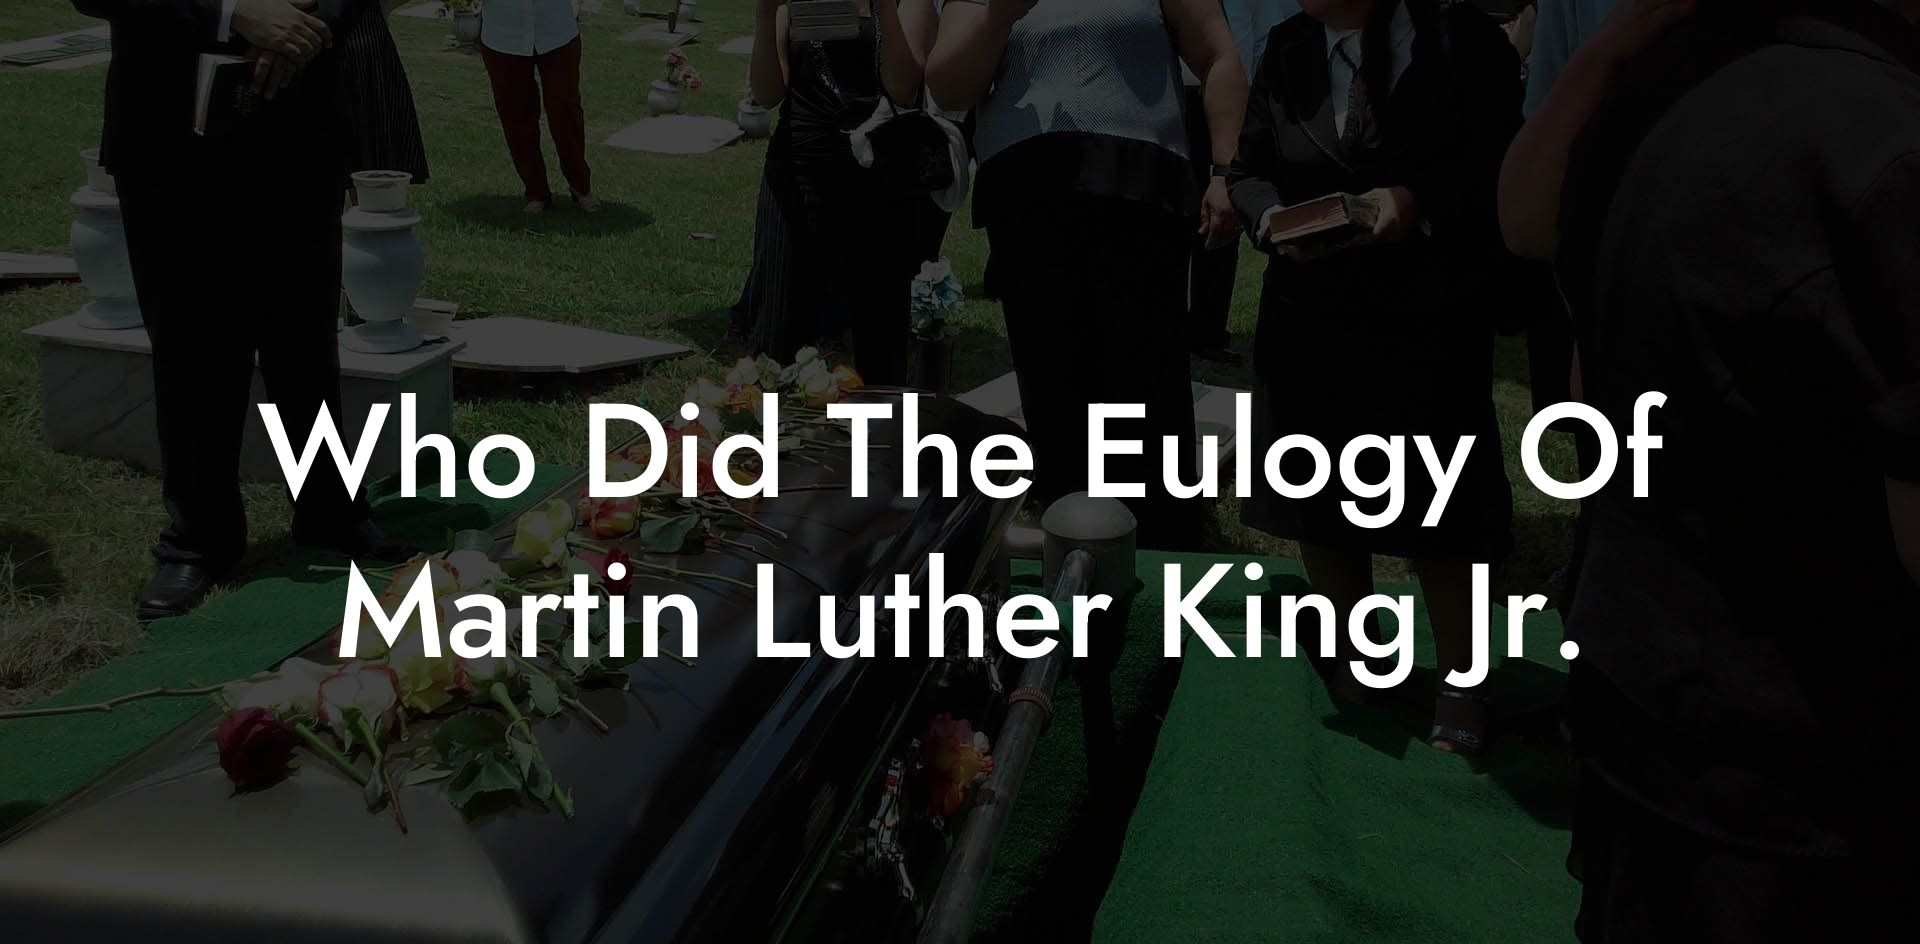 Who Did The Eulogy Of Martin Luther King Jr.